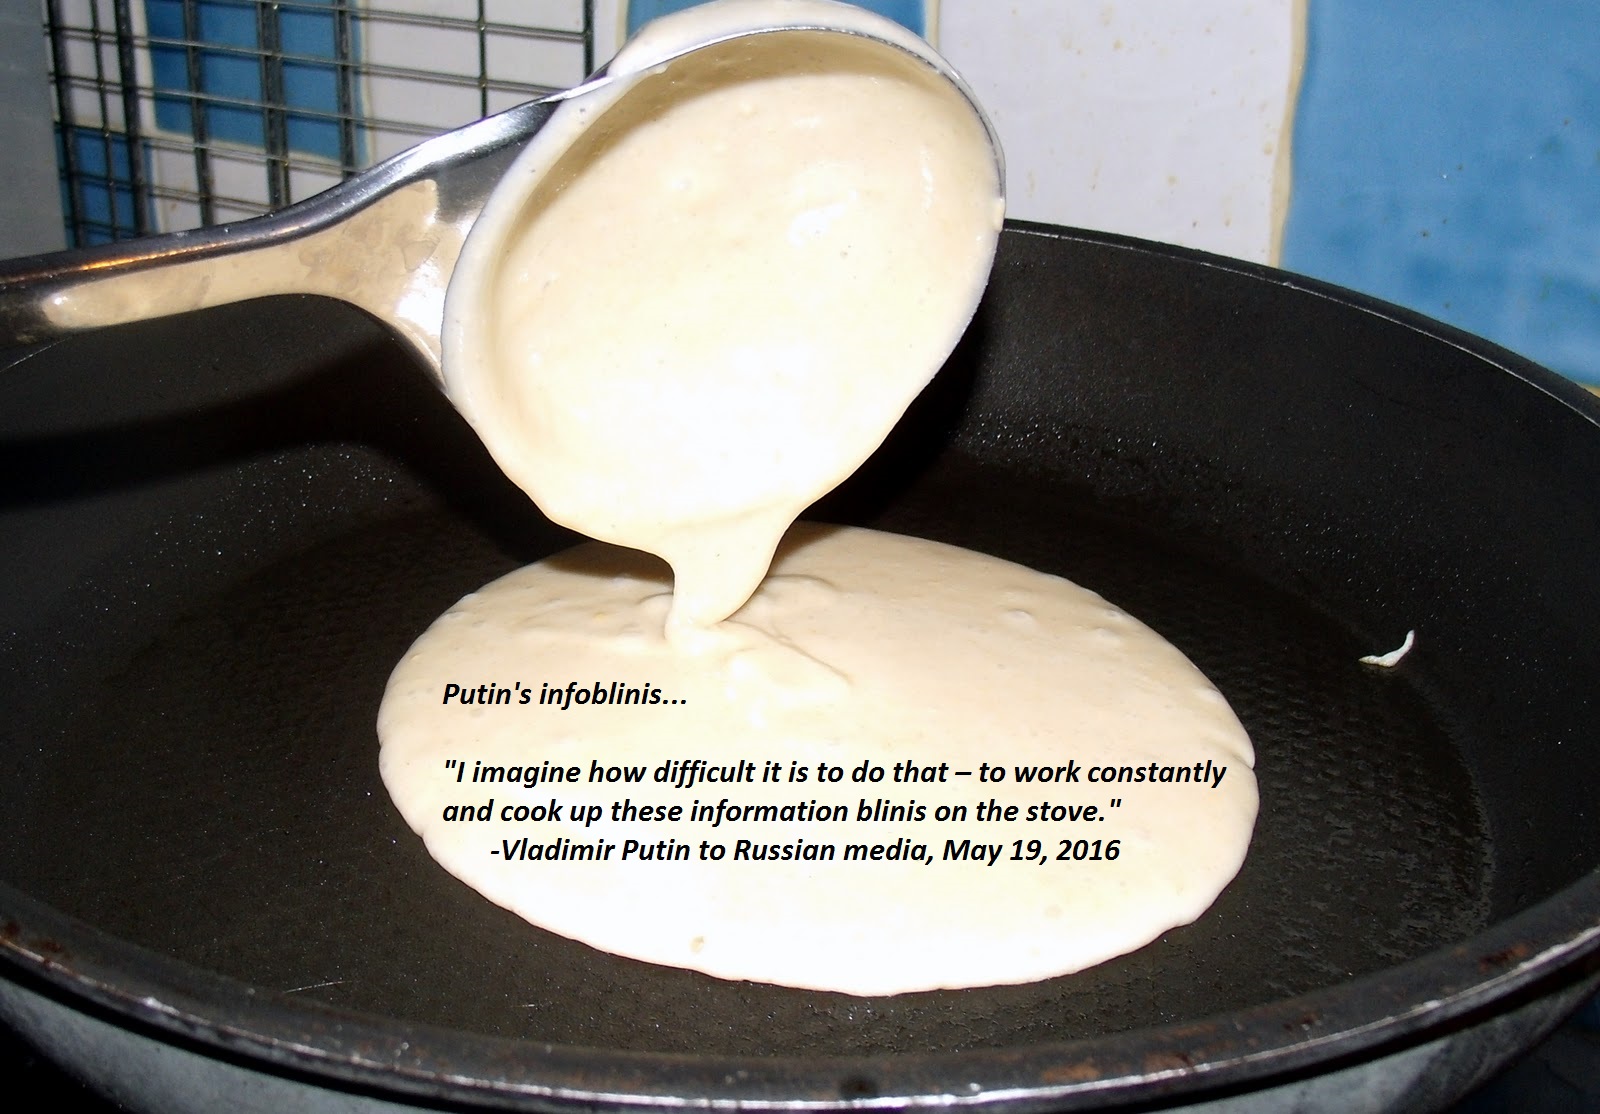 Vladimir Putin to Russian media: "I imagine how difficult it is to do that – to work constantly and cook up these information blinis on the stove.” (May 19, 2016)